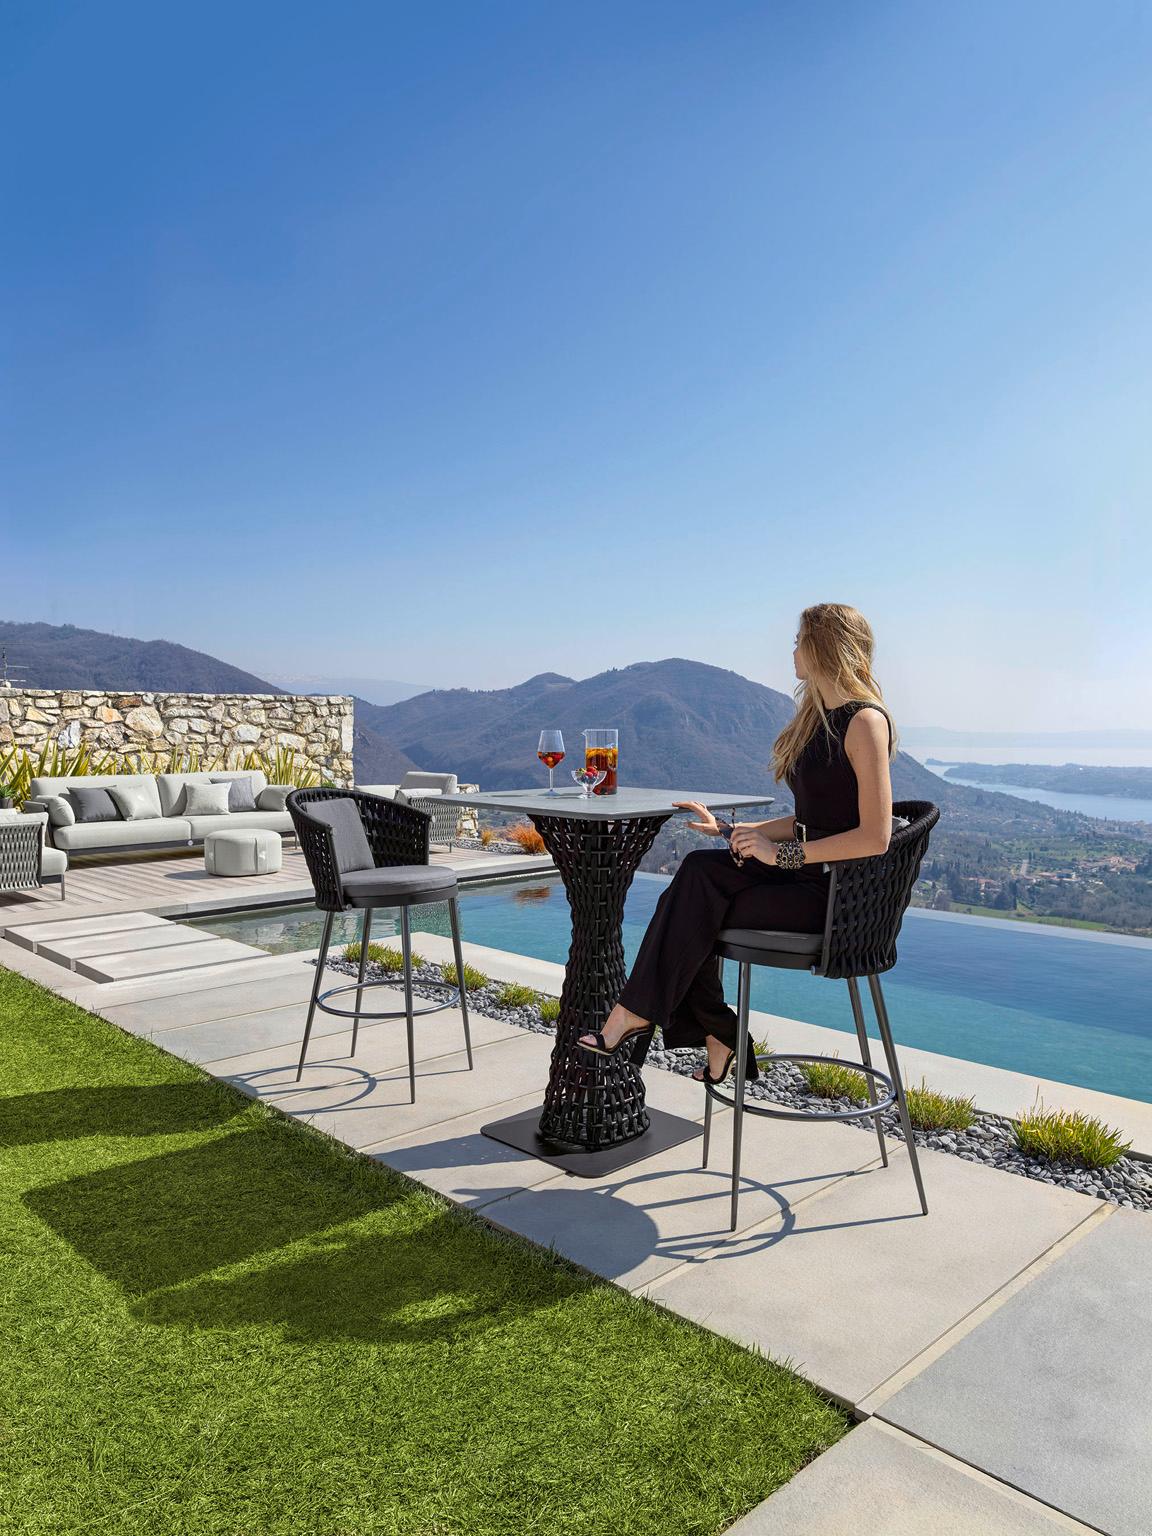 Giorgio Collection Dune Outdoor Garden Collection Outdoor Bar table Stone Top
Outdoor Bar table in combination of satined black metal treated in cataphoresis and Black woven cordage. 
Top in treated 